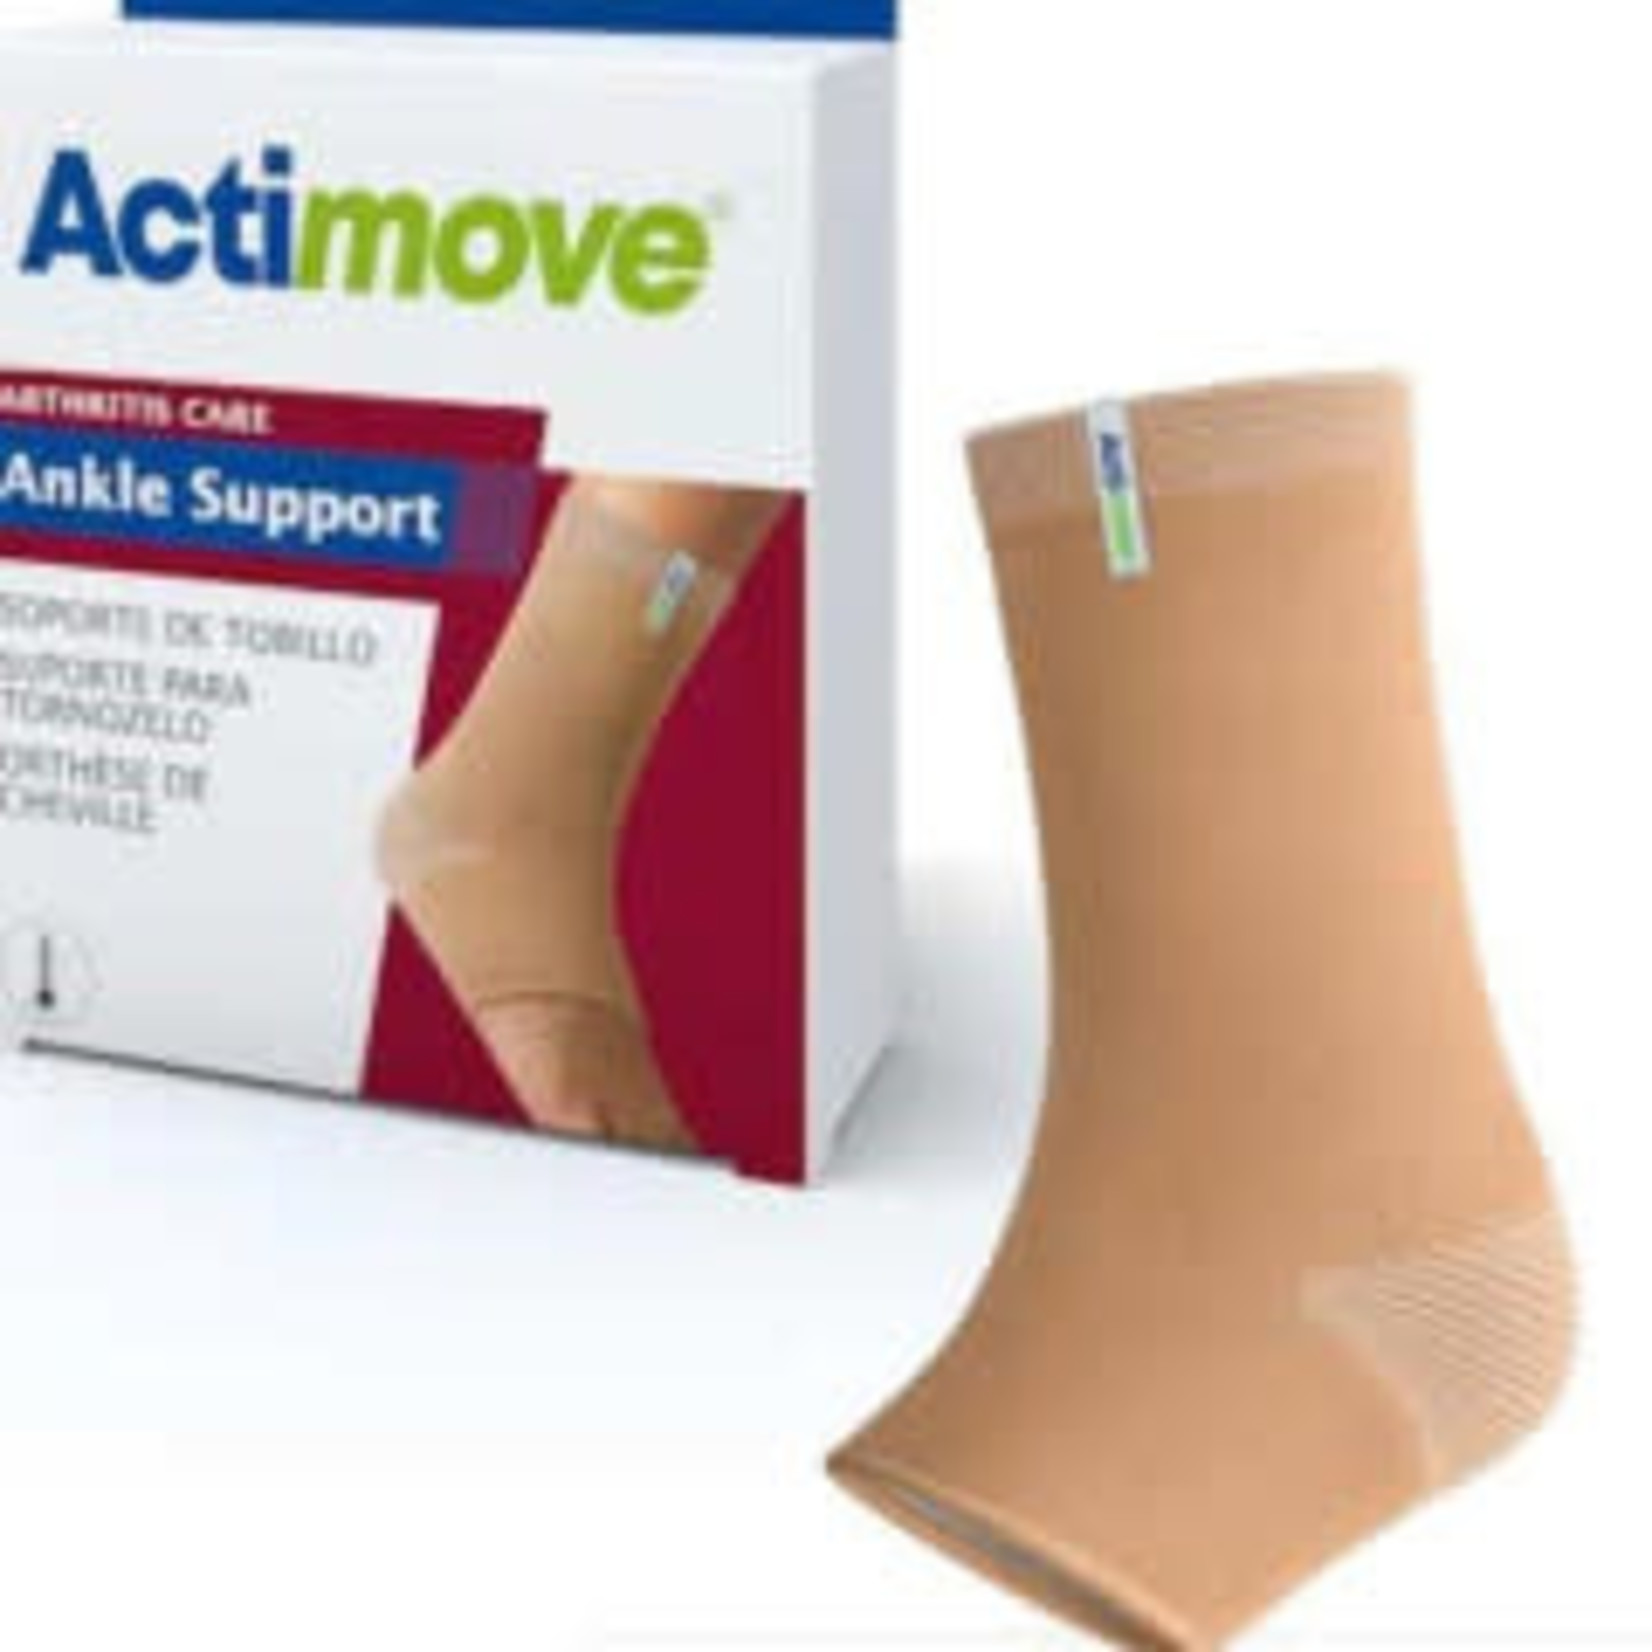 ActiMove Ankle Support - Arthritis Care